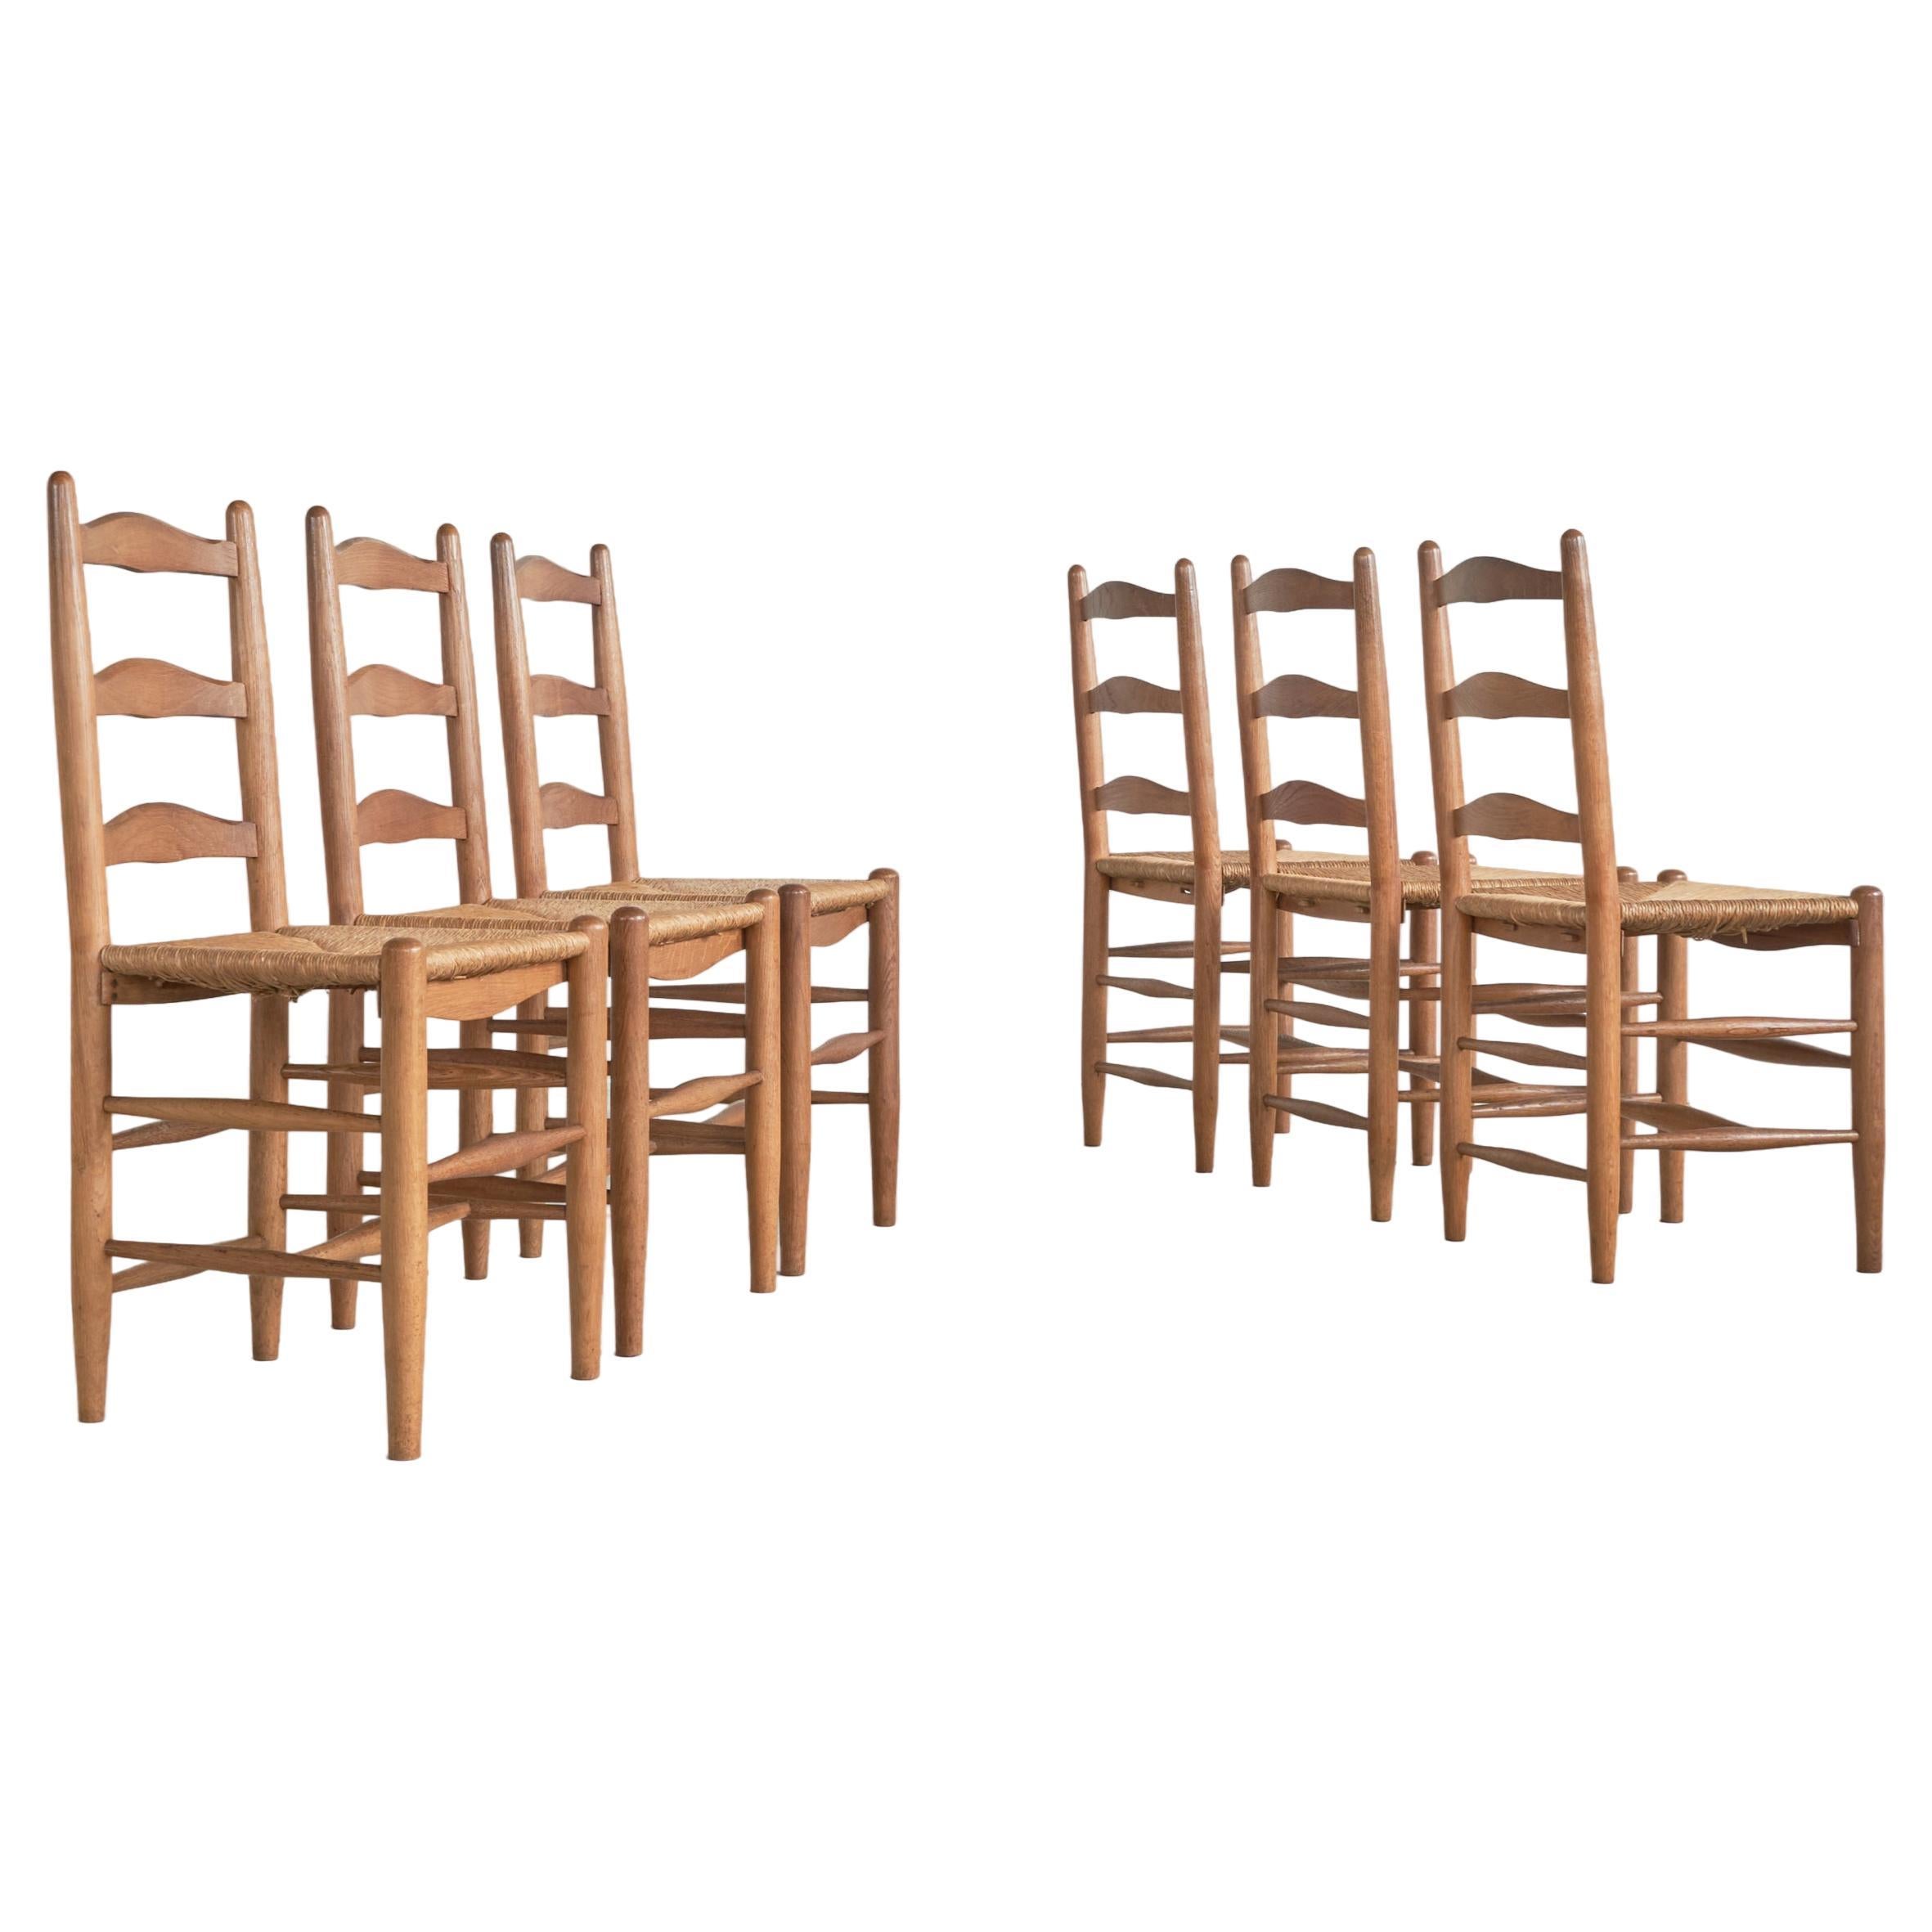 Set of 6 Midcentury Oak and Rush Chairs, 1950s For Sale